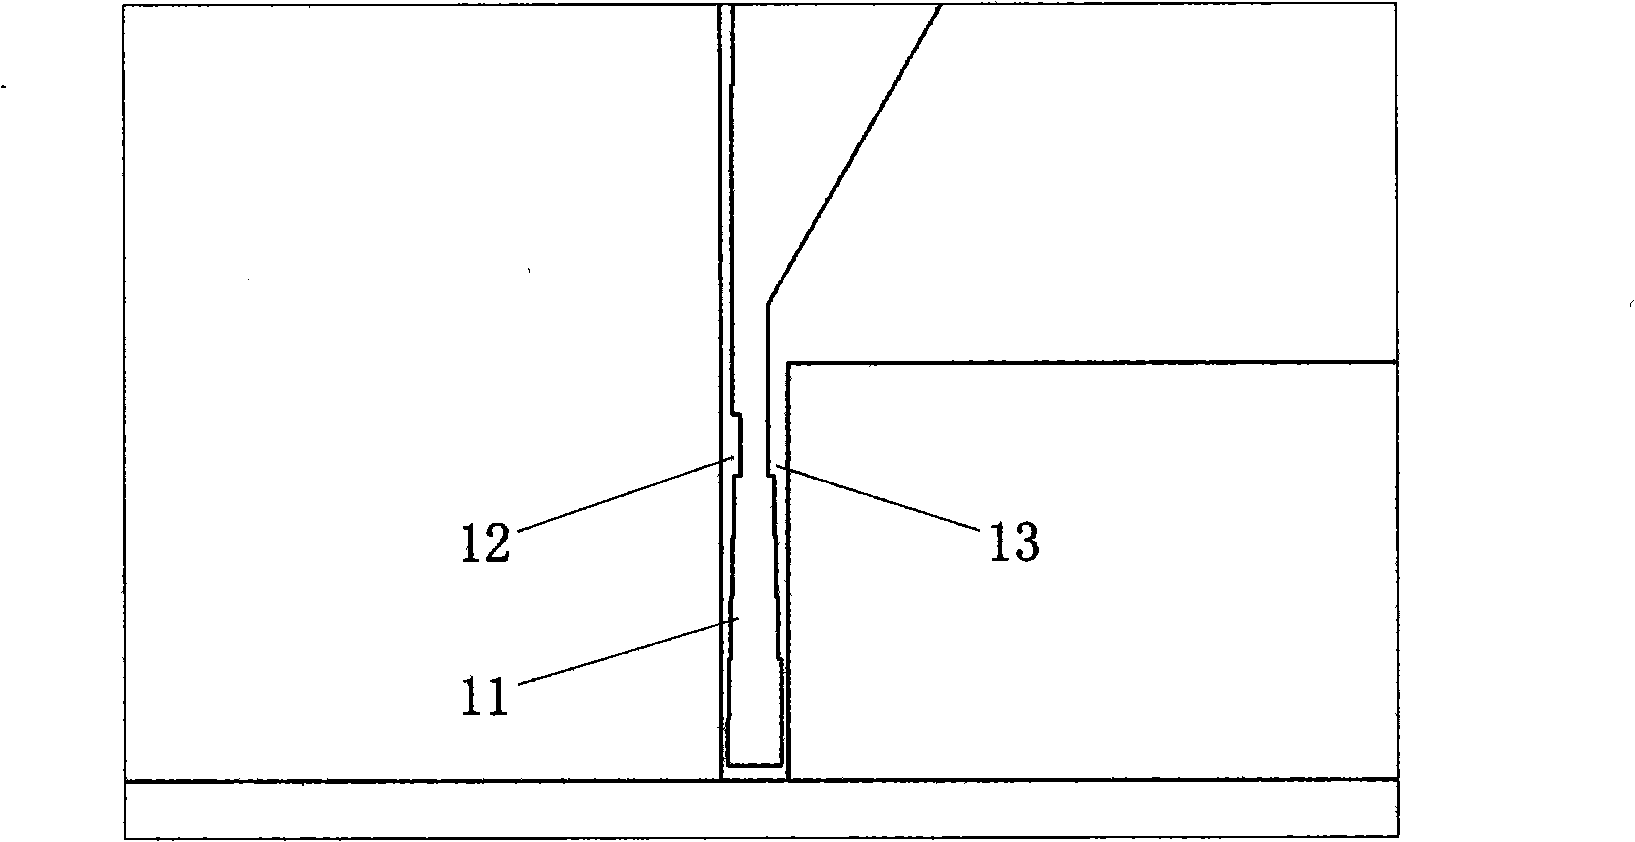 Low-outline ultra-wideband plow-shaped antenna